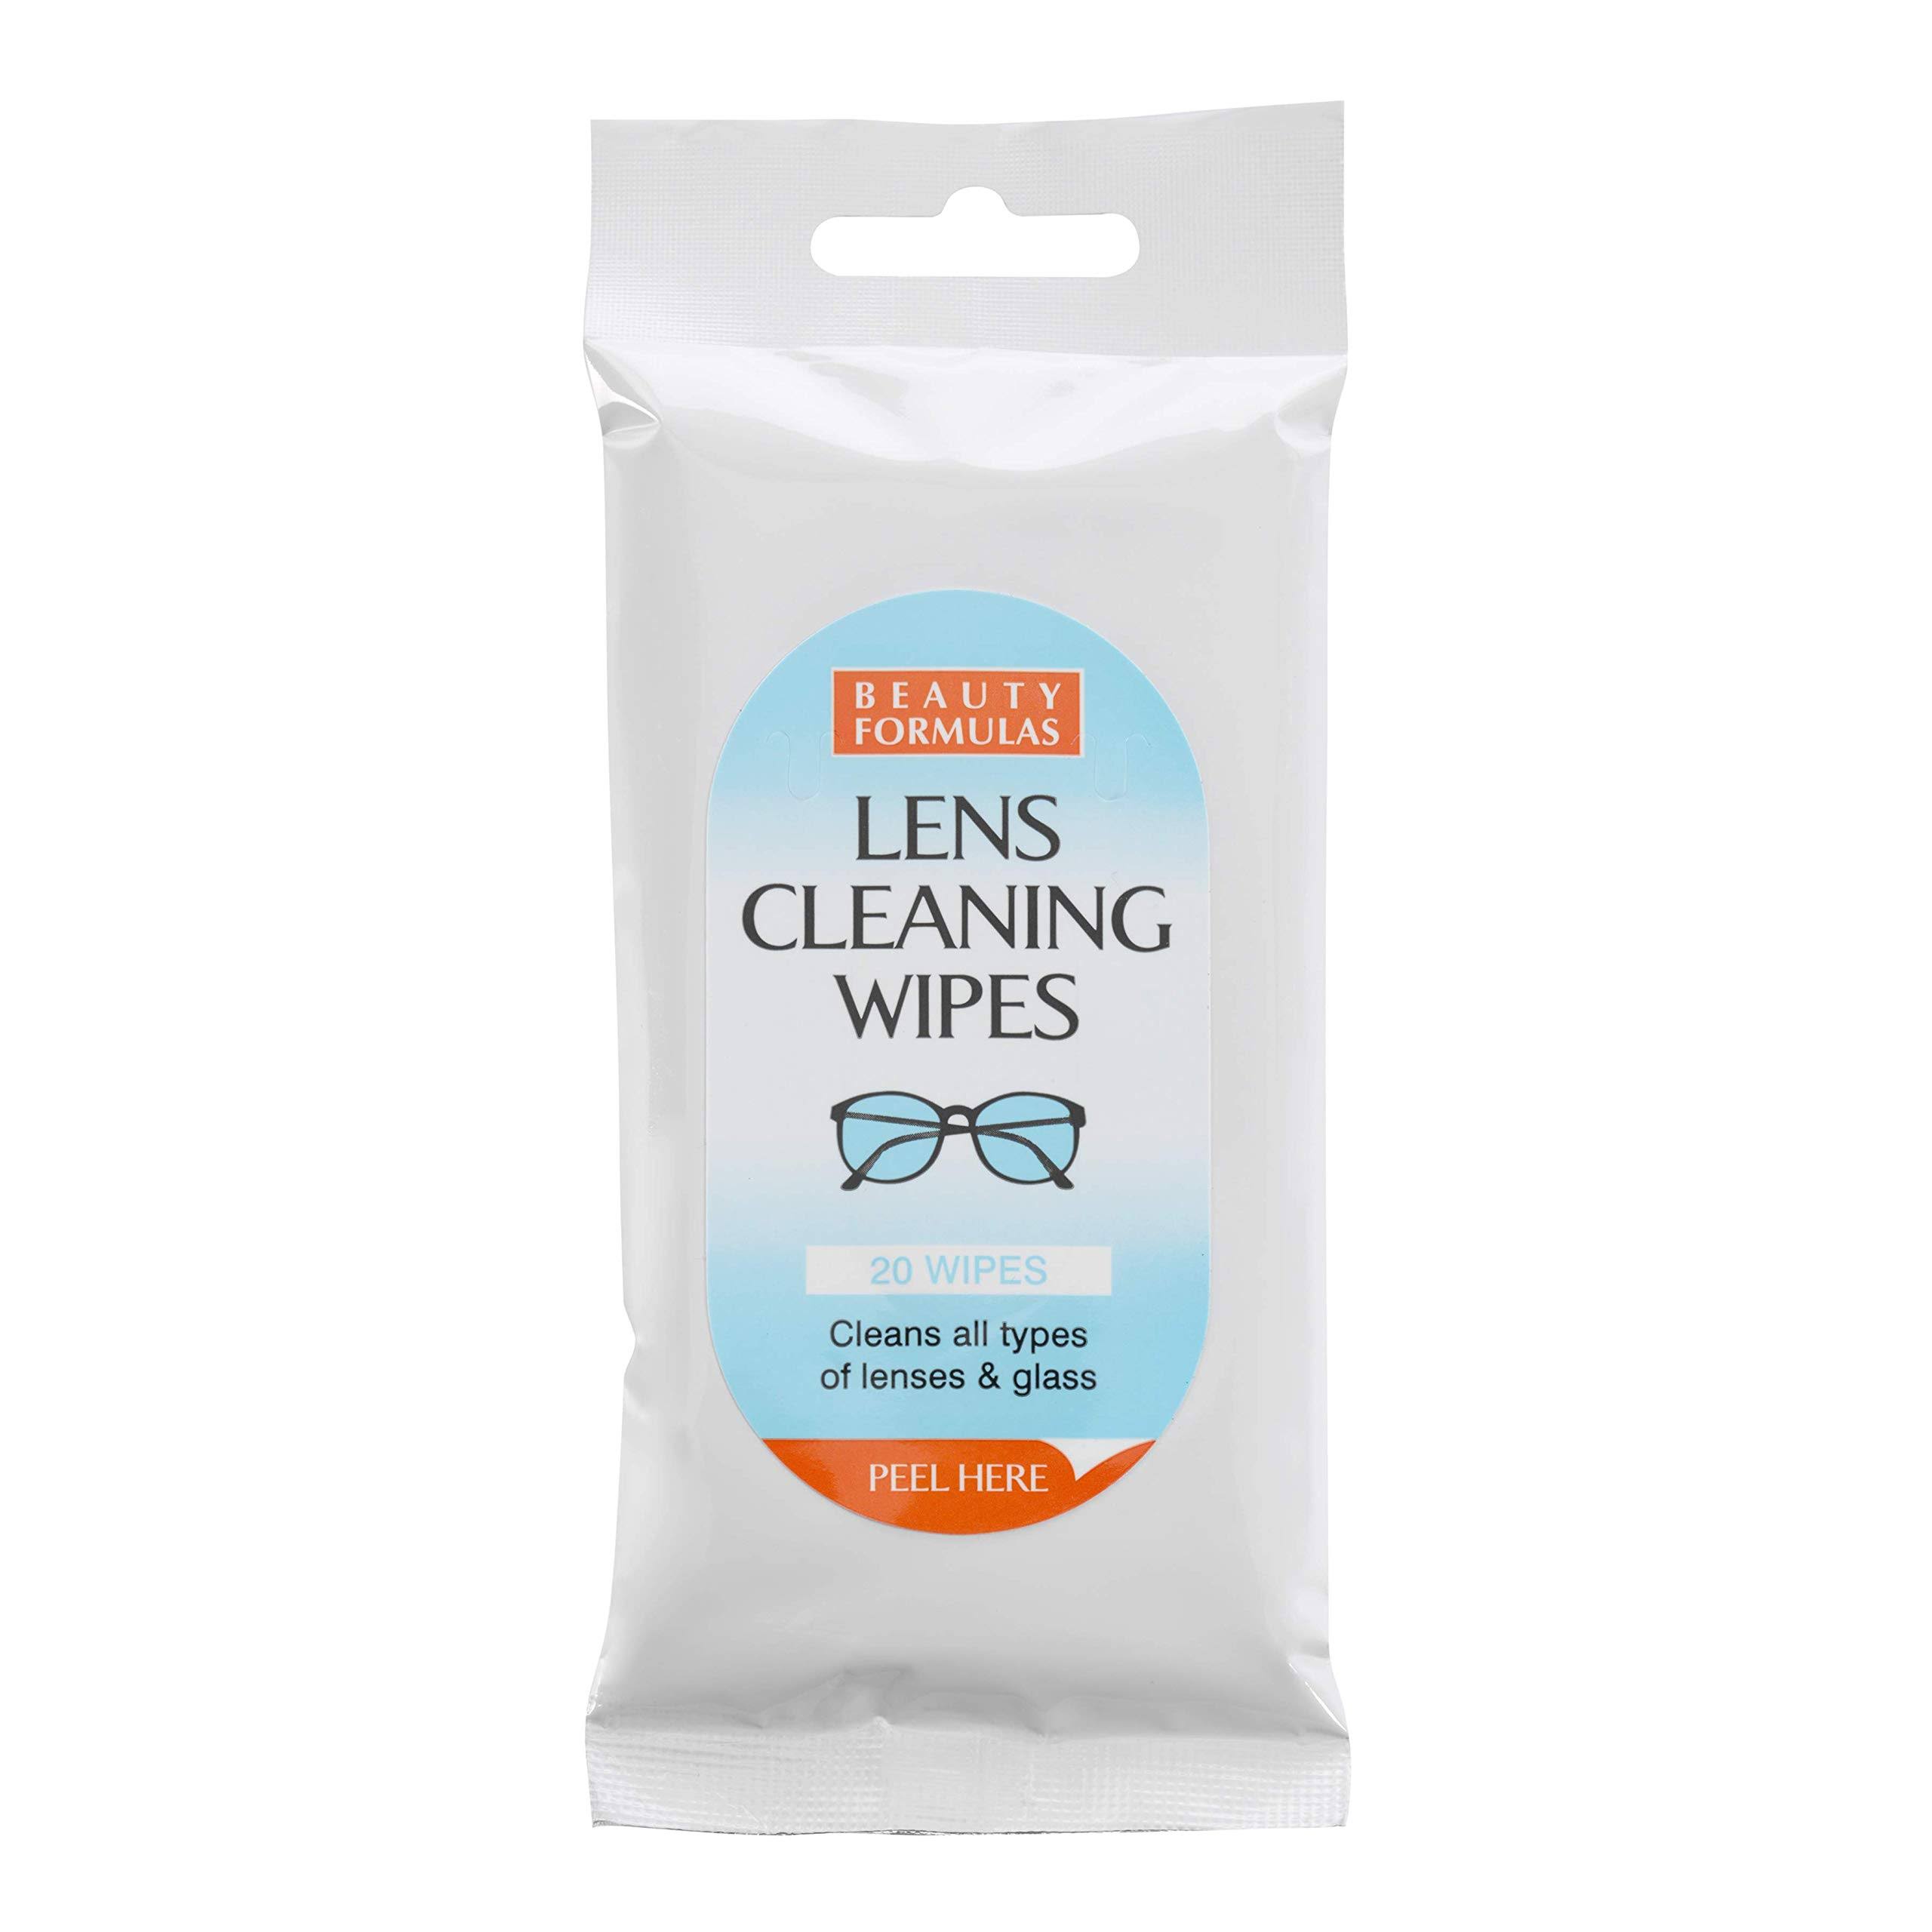 Beauty Formulas Lens Cleaning Wipes